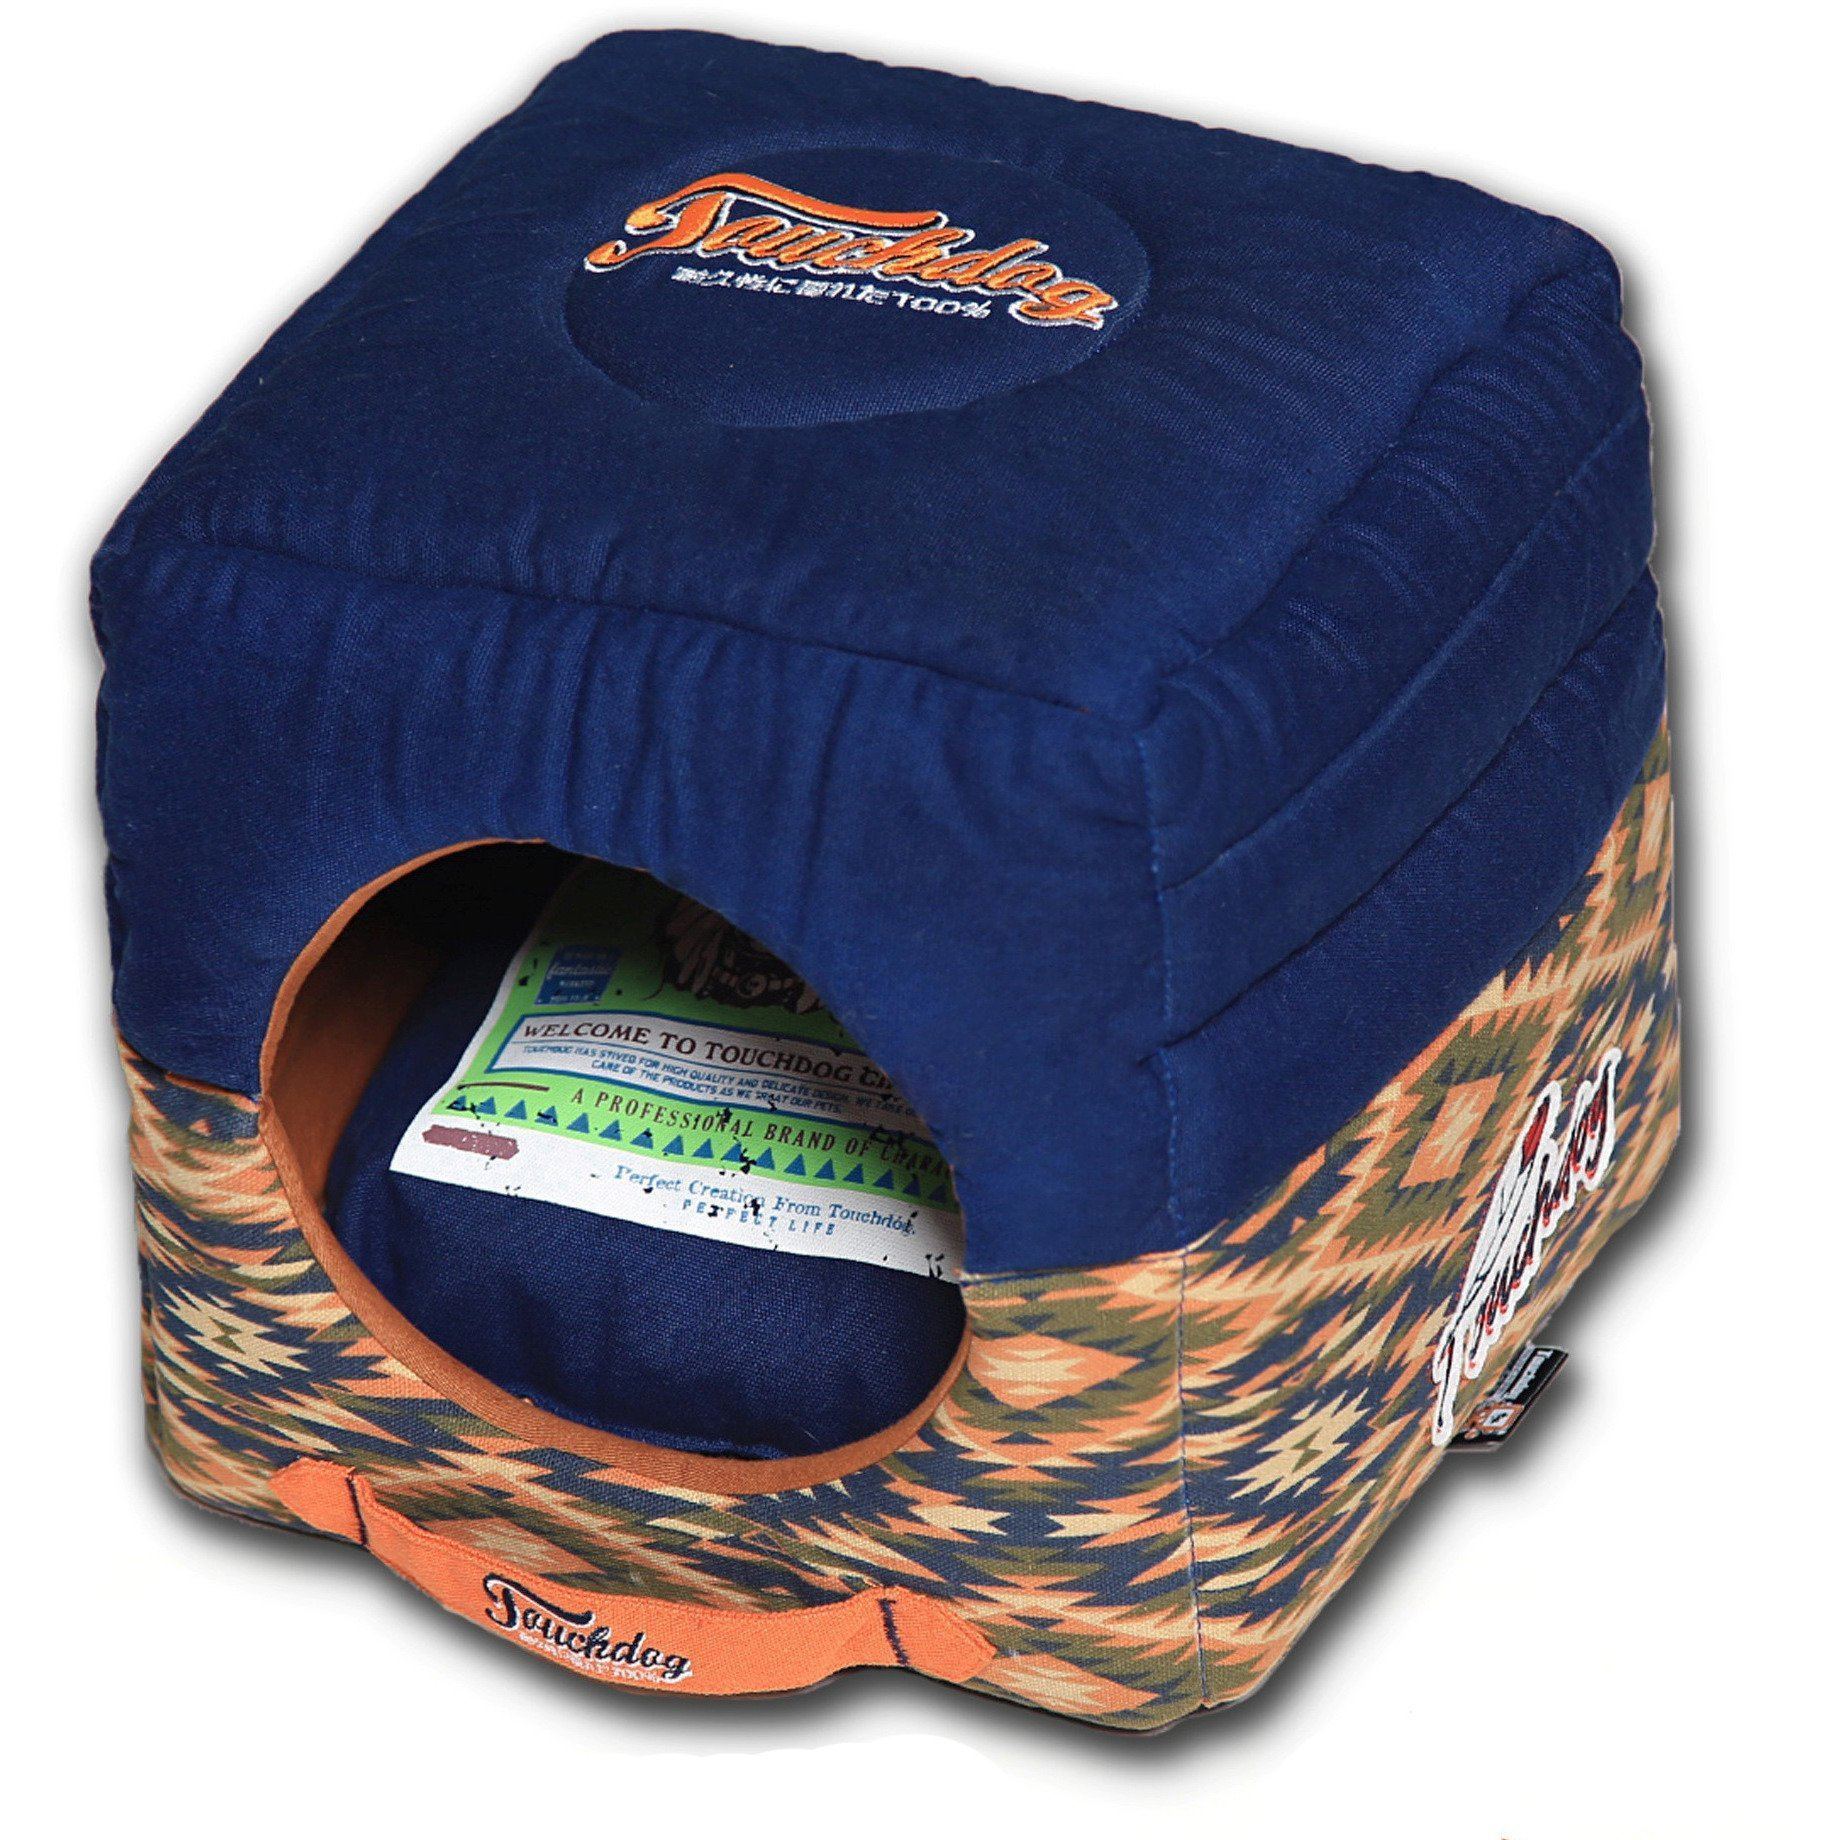 Touchdog ® '70's Vintage-Tribal' 2-in-1 Collapsible Squared Dog and Cat Bed Midnight Blue, Sandalwood 